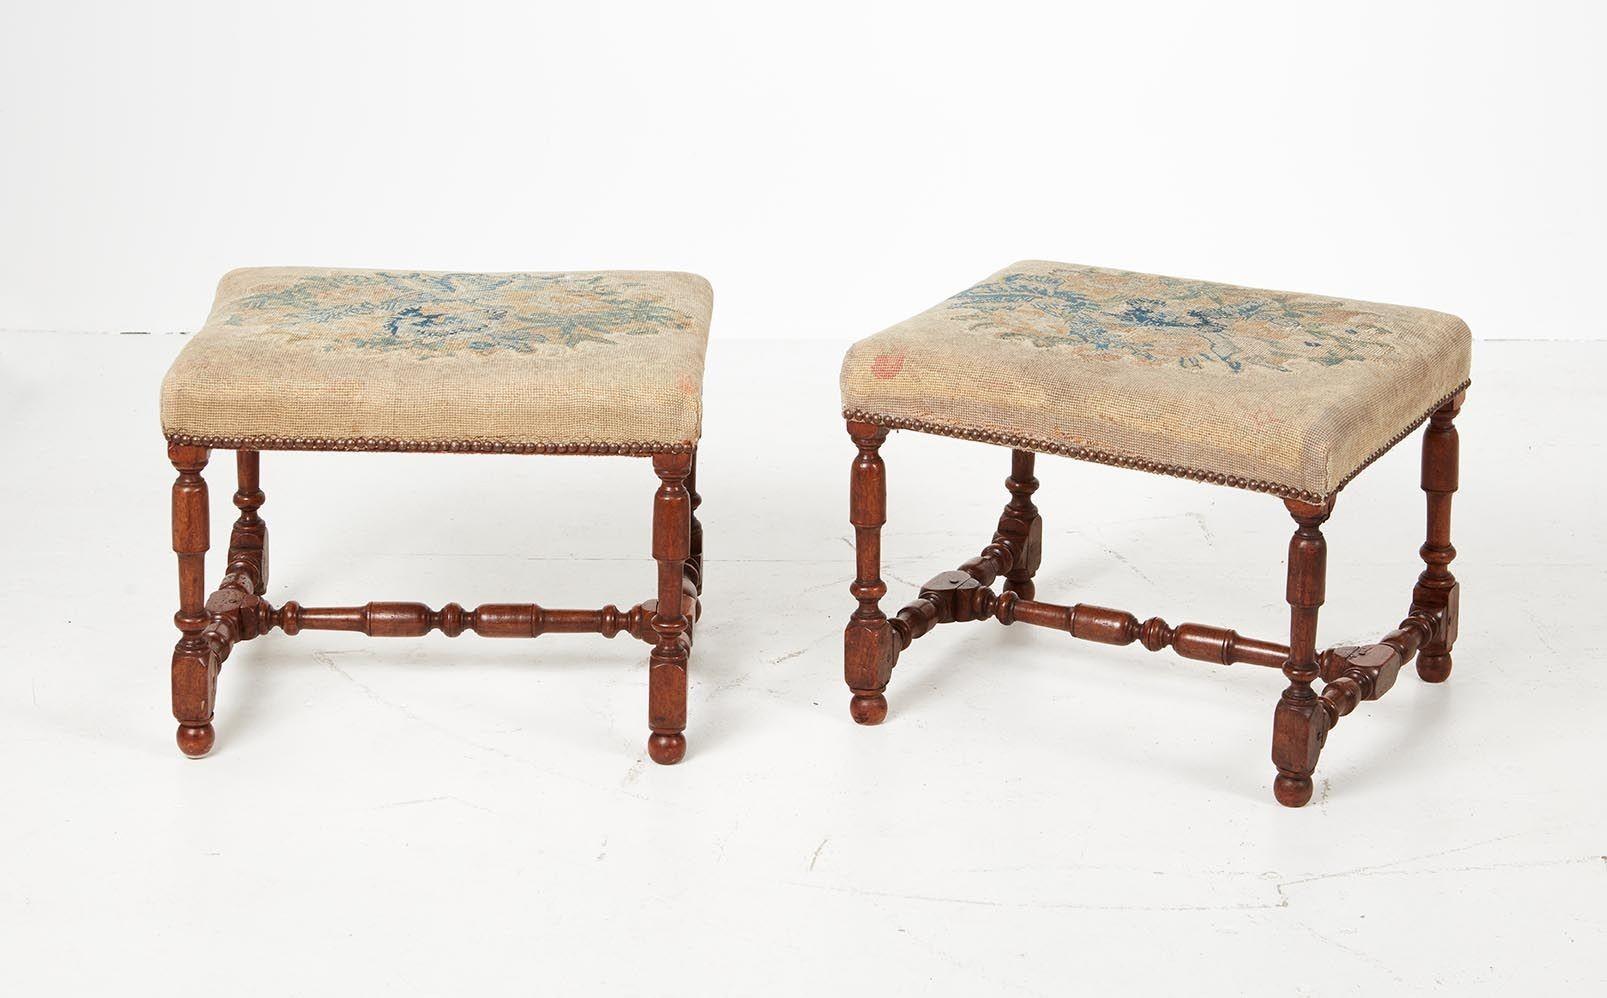 Italian A Rare Pair of Baroque Walnut Needlework Benches For Sale